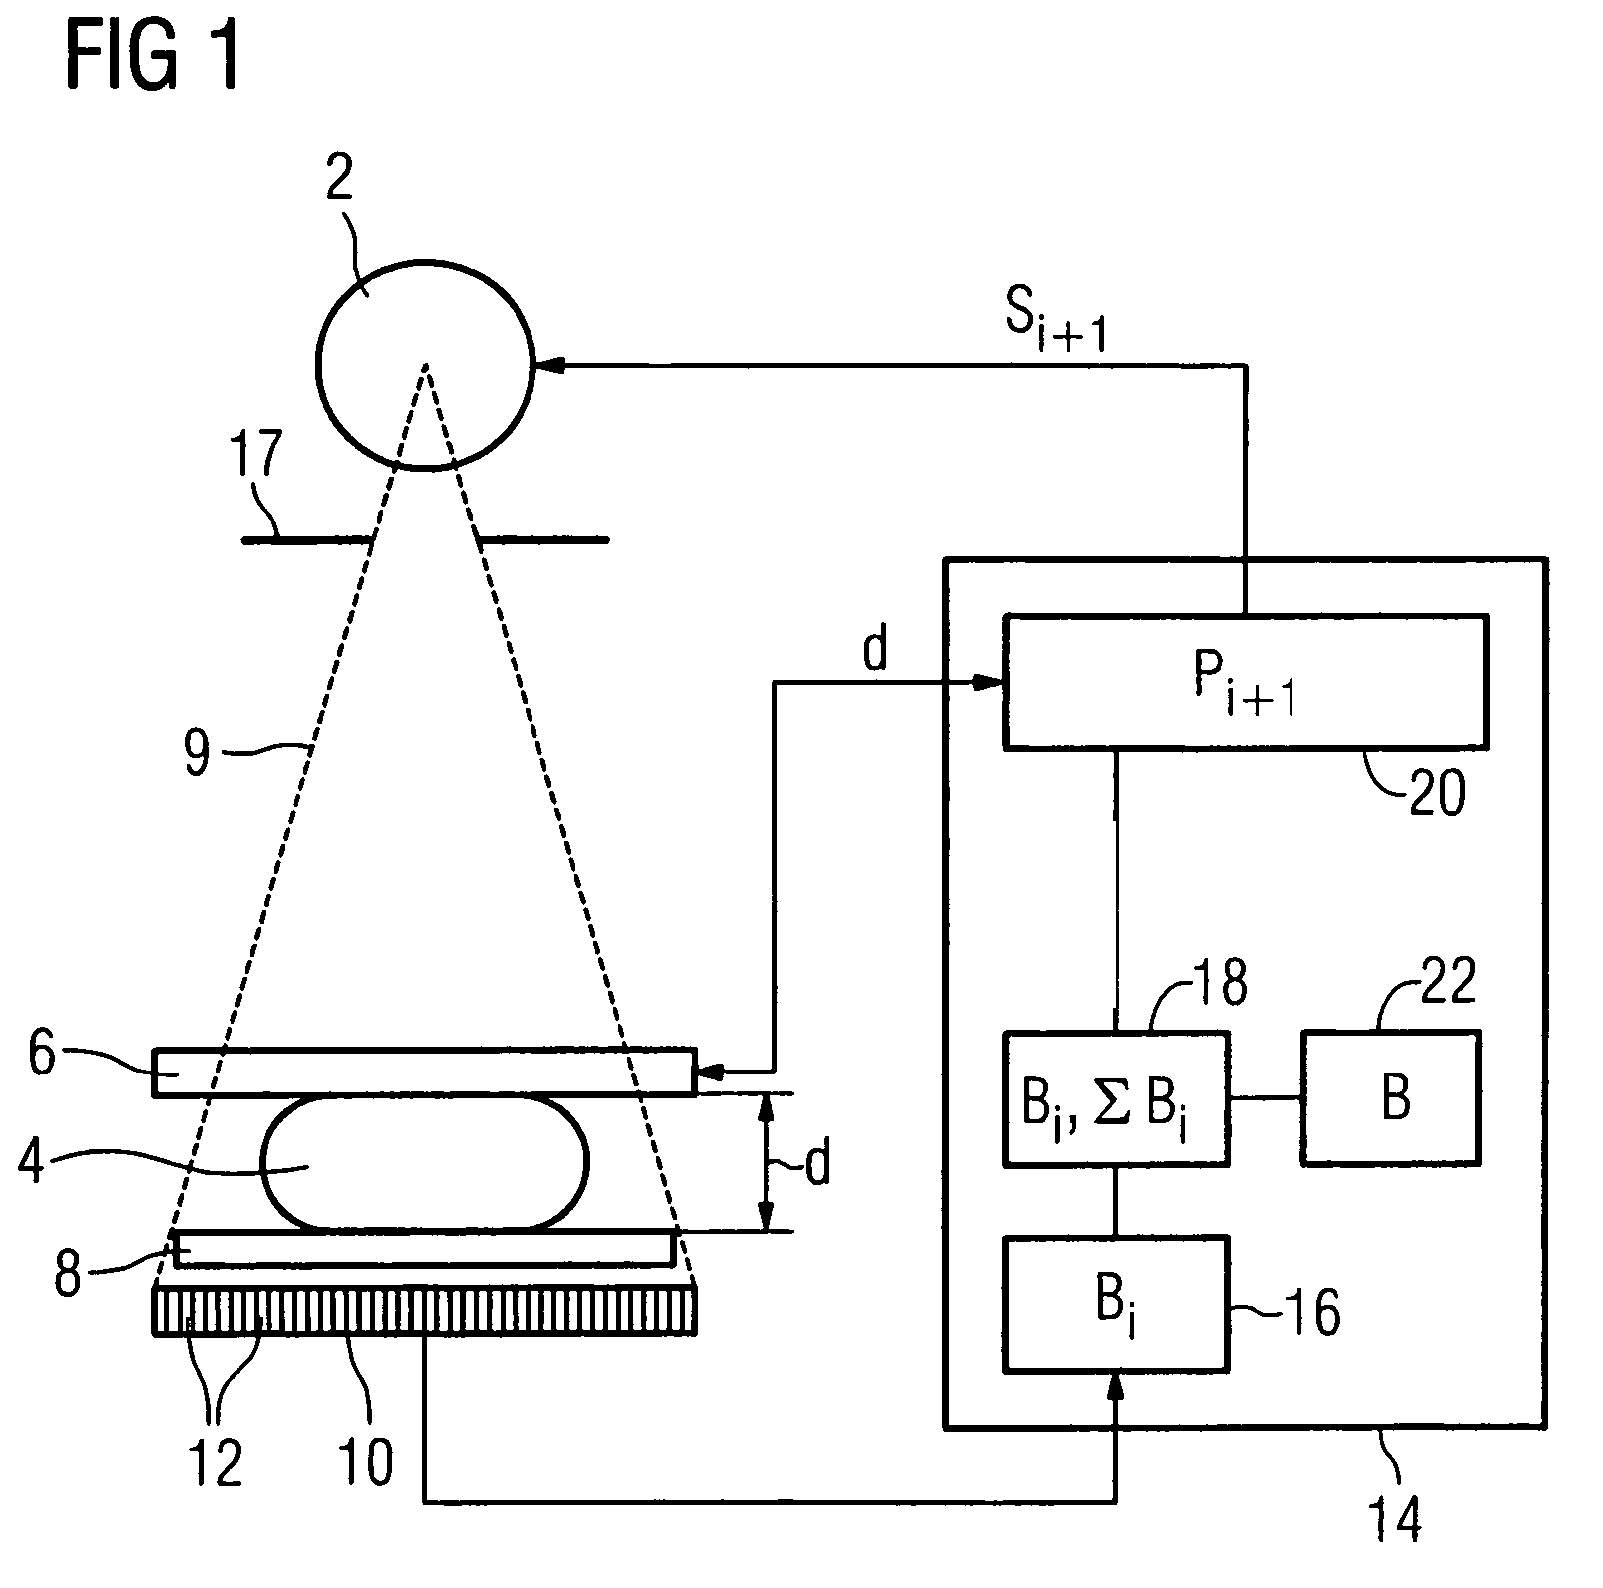 Method and apparatus for generating of a digital x-ray image